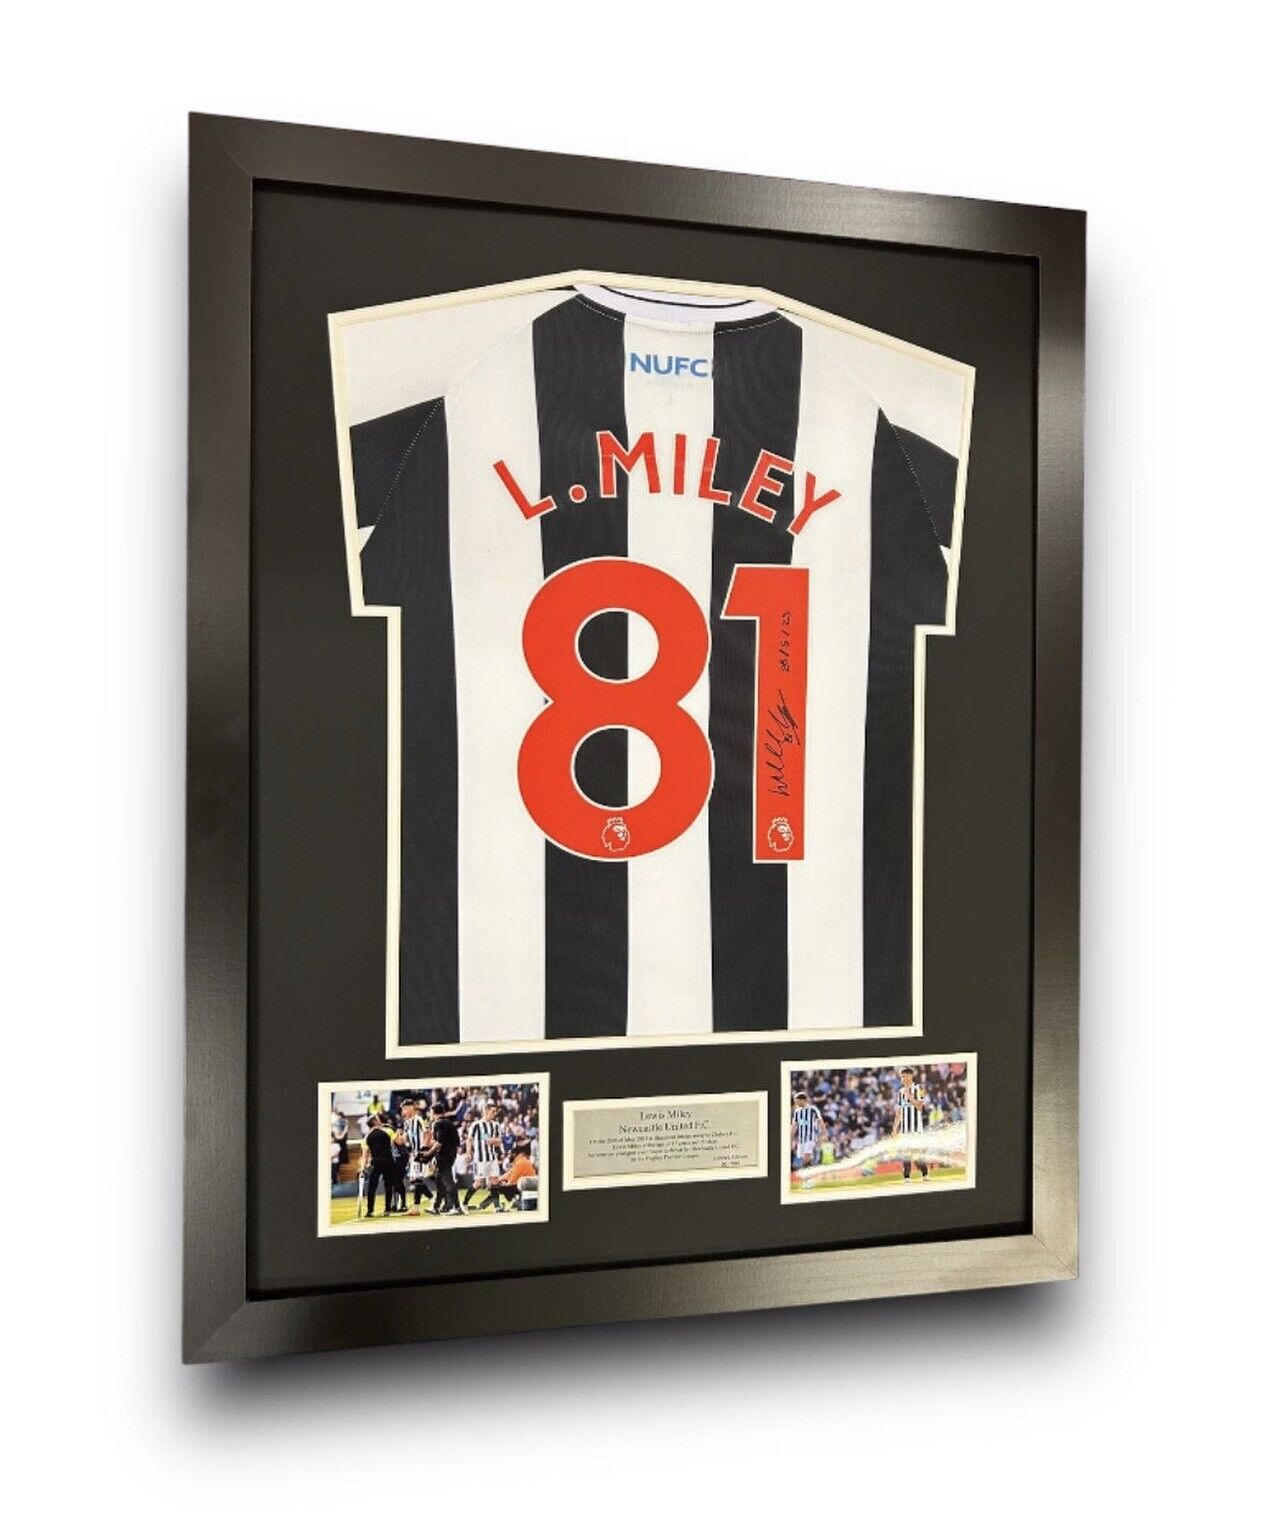 Newcastle United FC Shirt Framed Signed By Lewis Miley Limited Edition 1/100